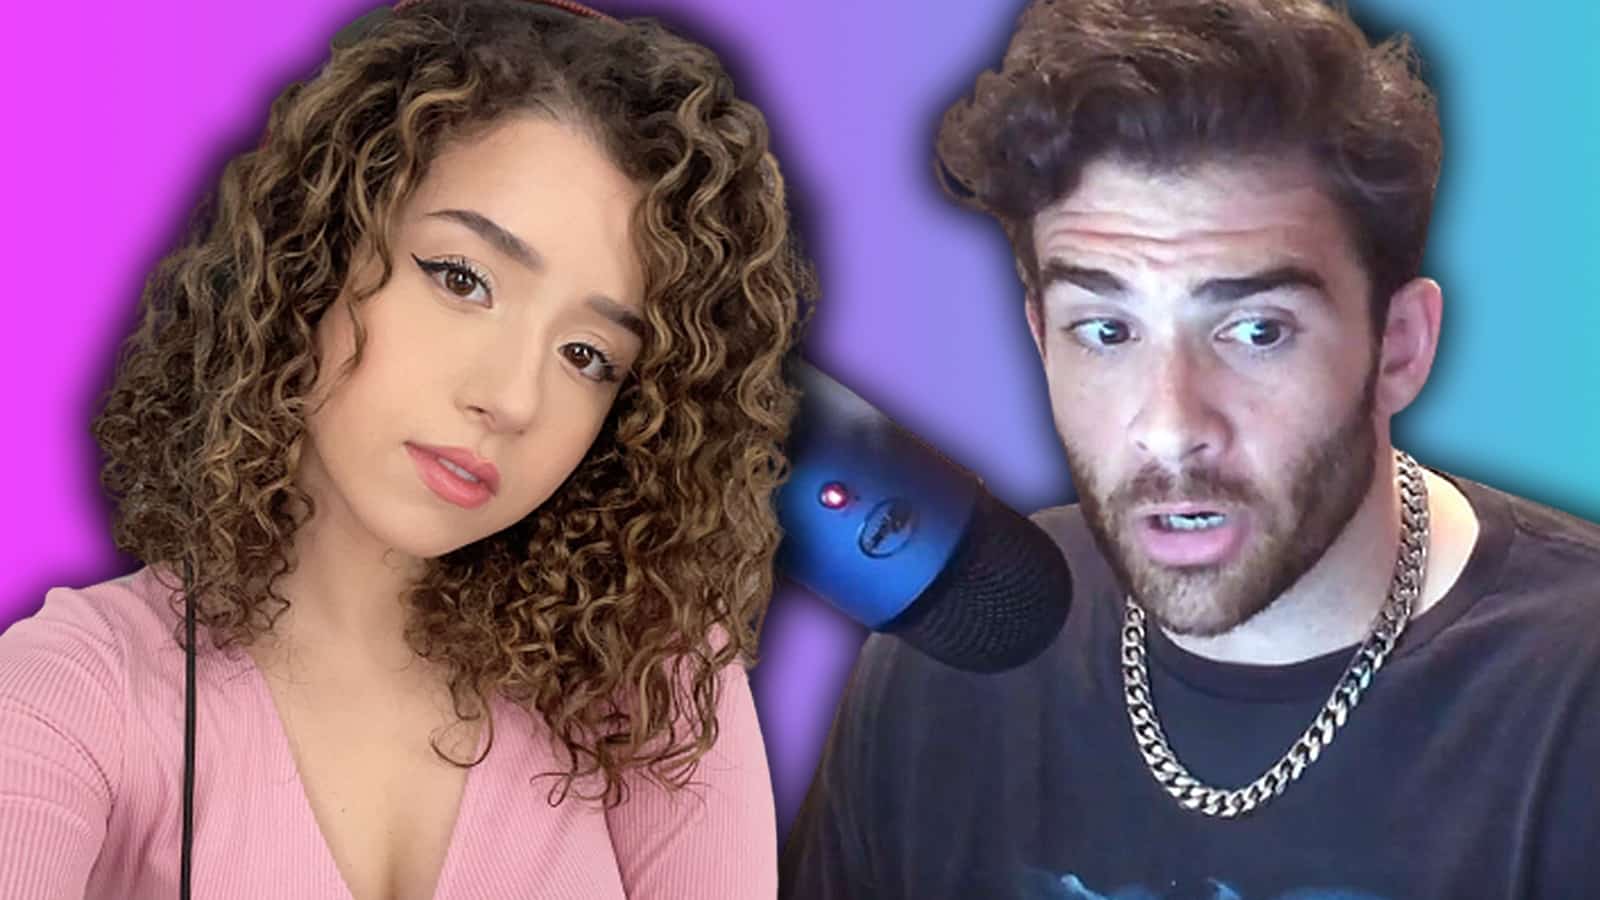 Hasan rips into Twitch viewer accusing Pokimane of blackface natural curls